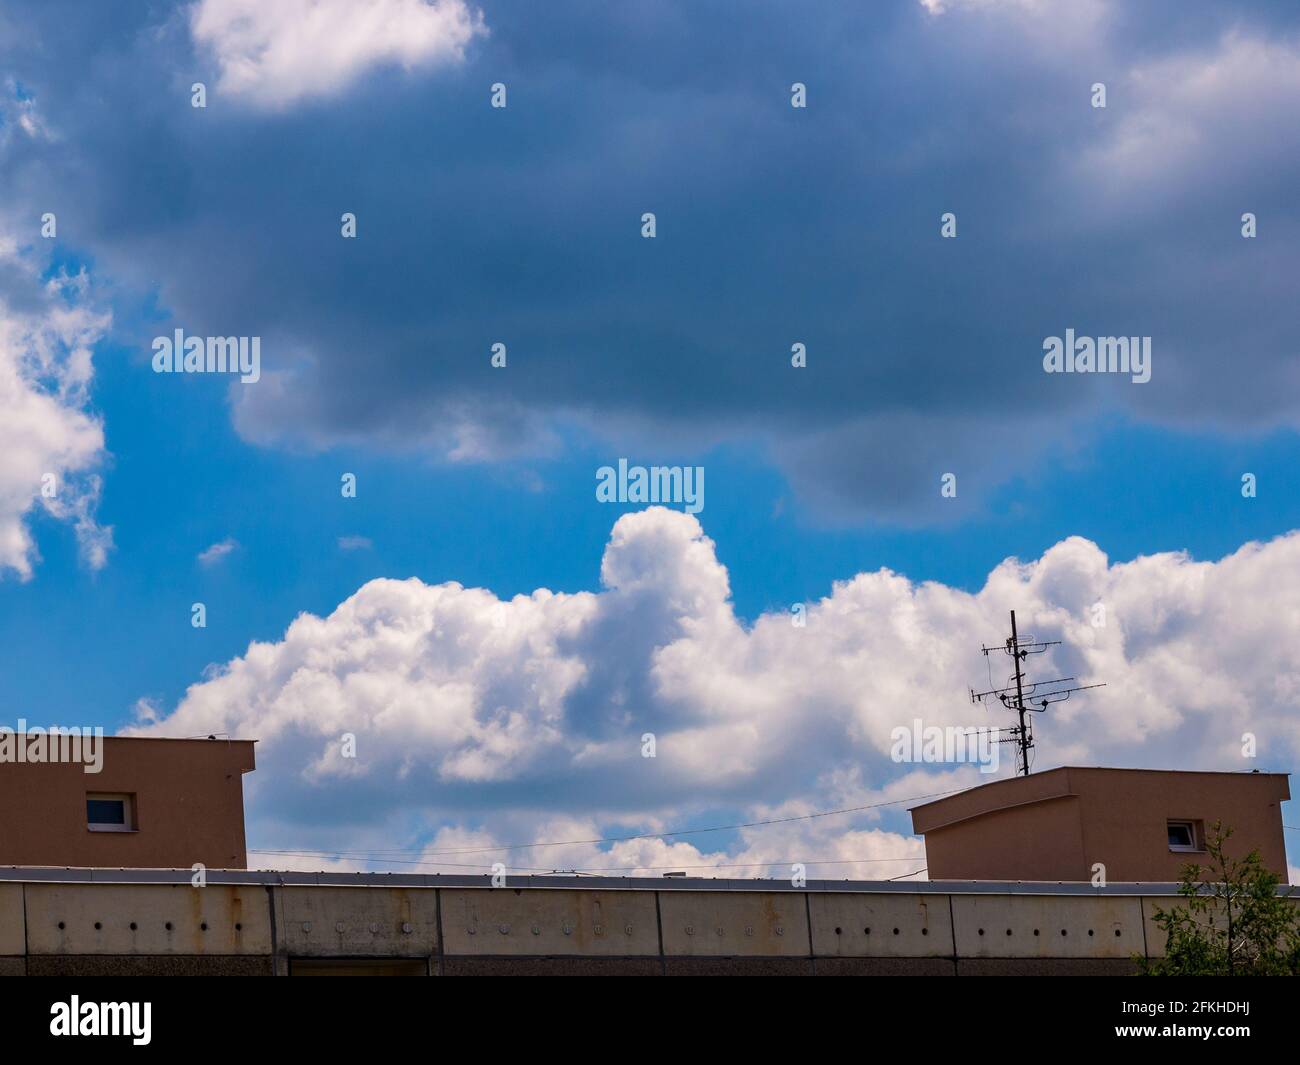 Cloud - towering cumulus - forming in the distance above the roof of the house Stock Photo